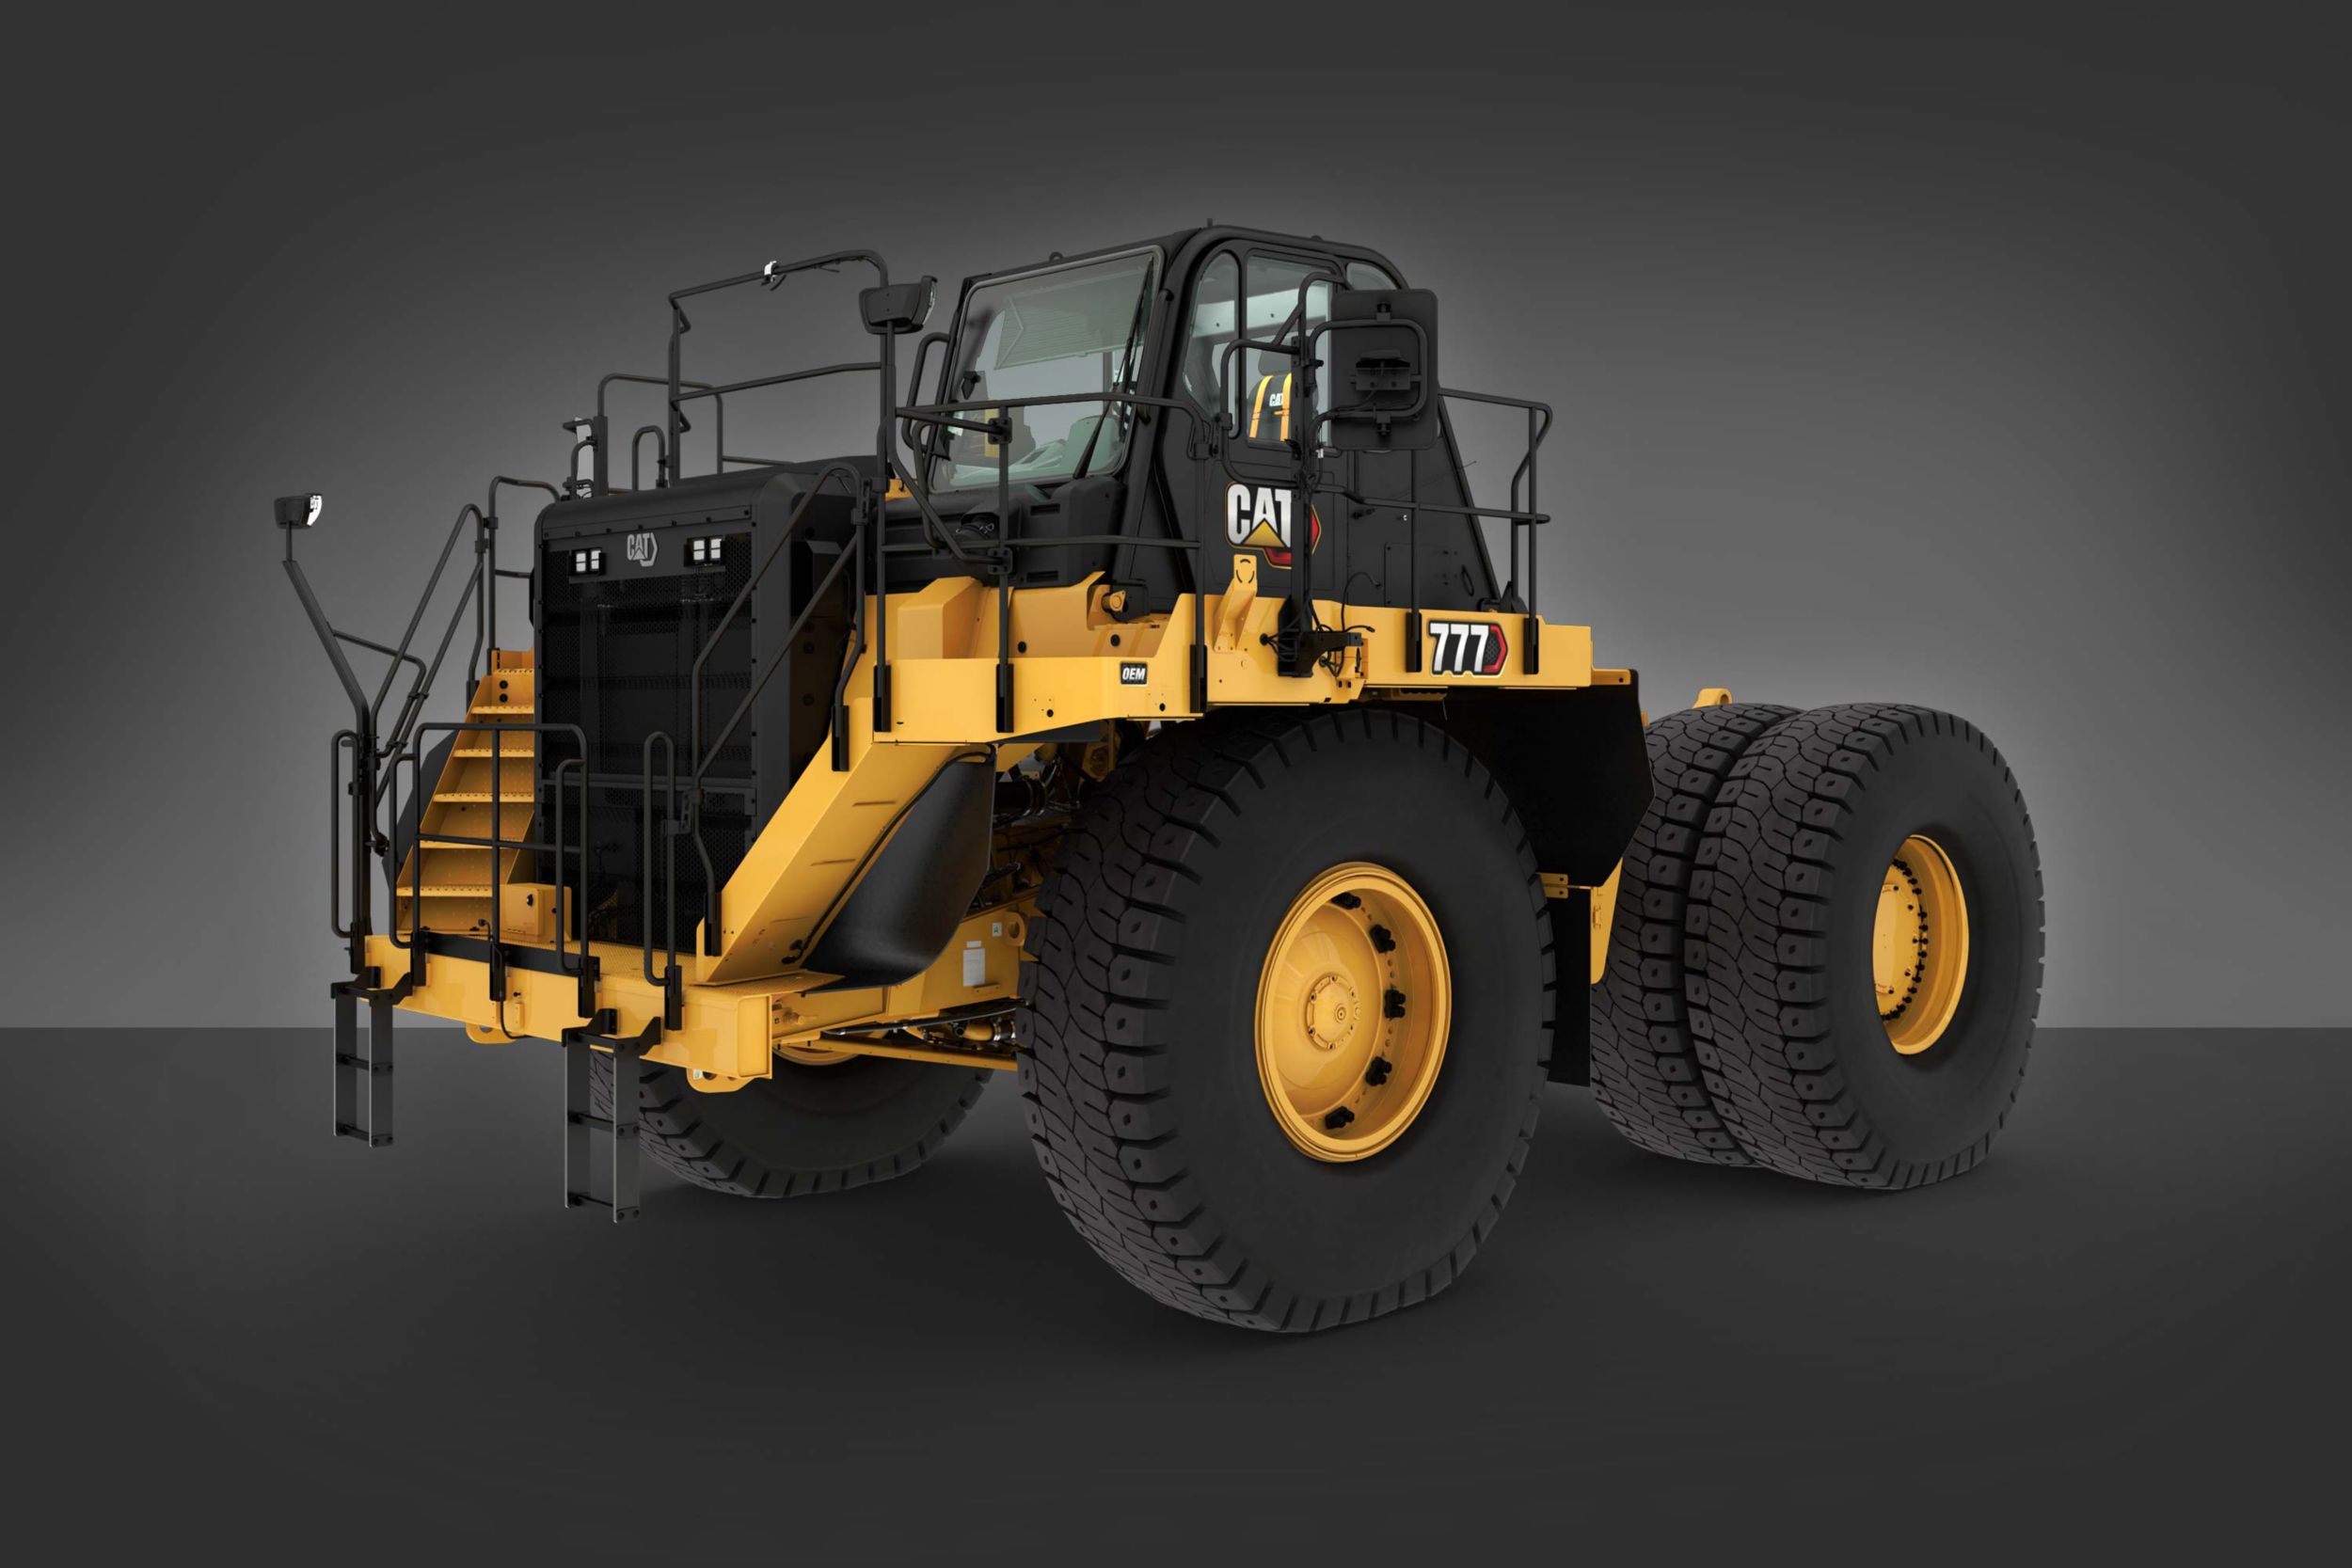 The Cat 777 bare chassis comes equipped with a higher Tractor ROPS certification ratings needed for specialty machines including water trucks, tow trucks, and fuel and lube trucks.